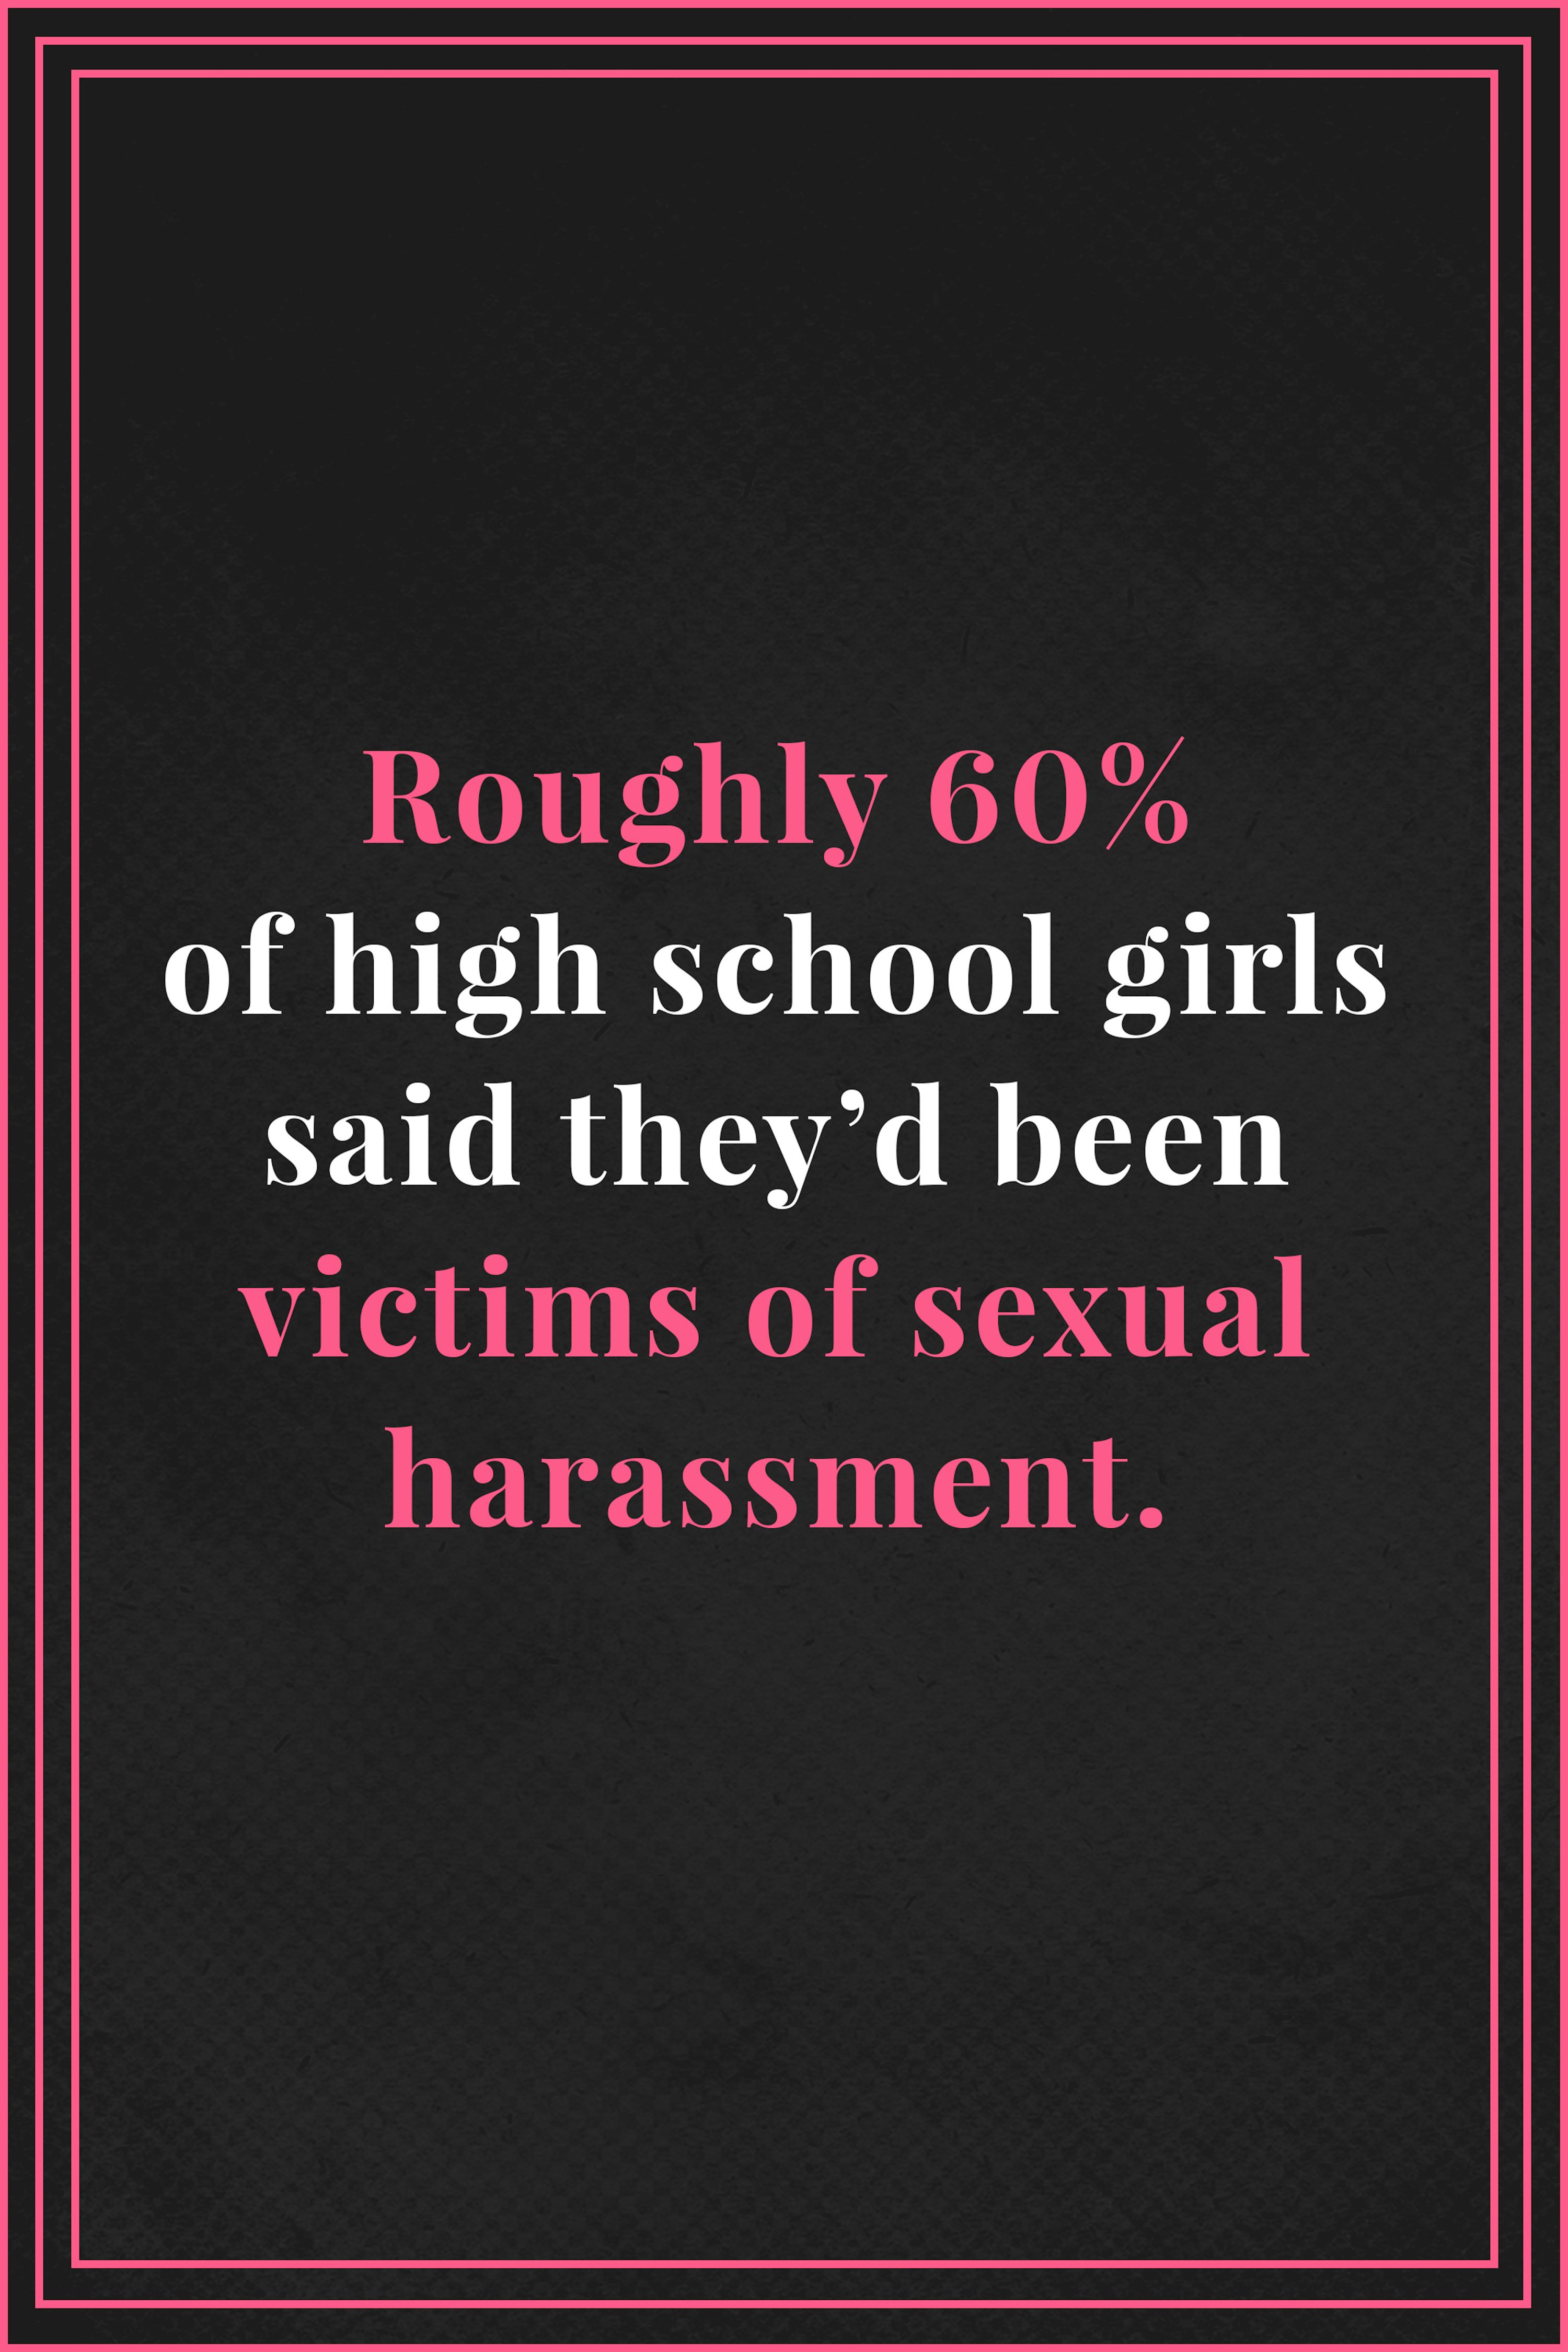 School Girl Fuking - Sexual Harassment in School - Real Girls Share Experiences Of Sexual  Assault in School